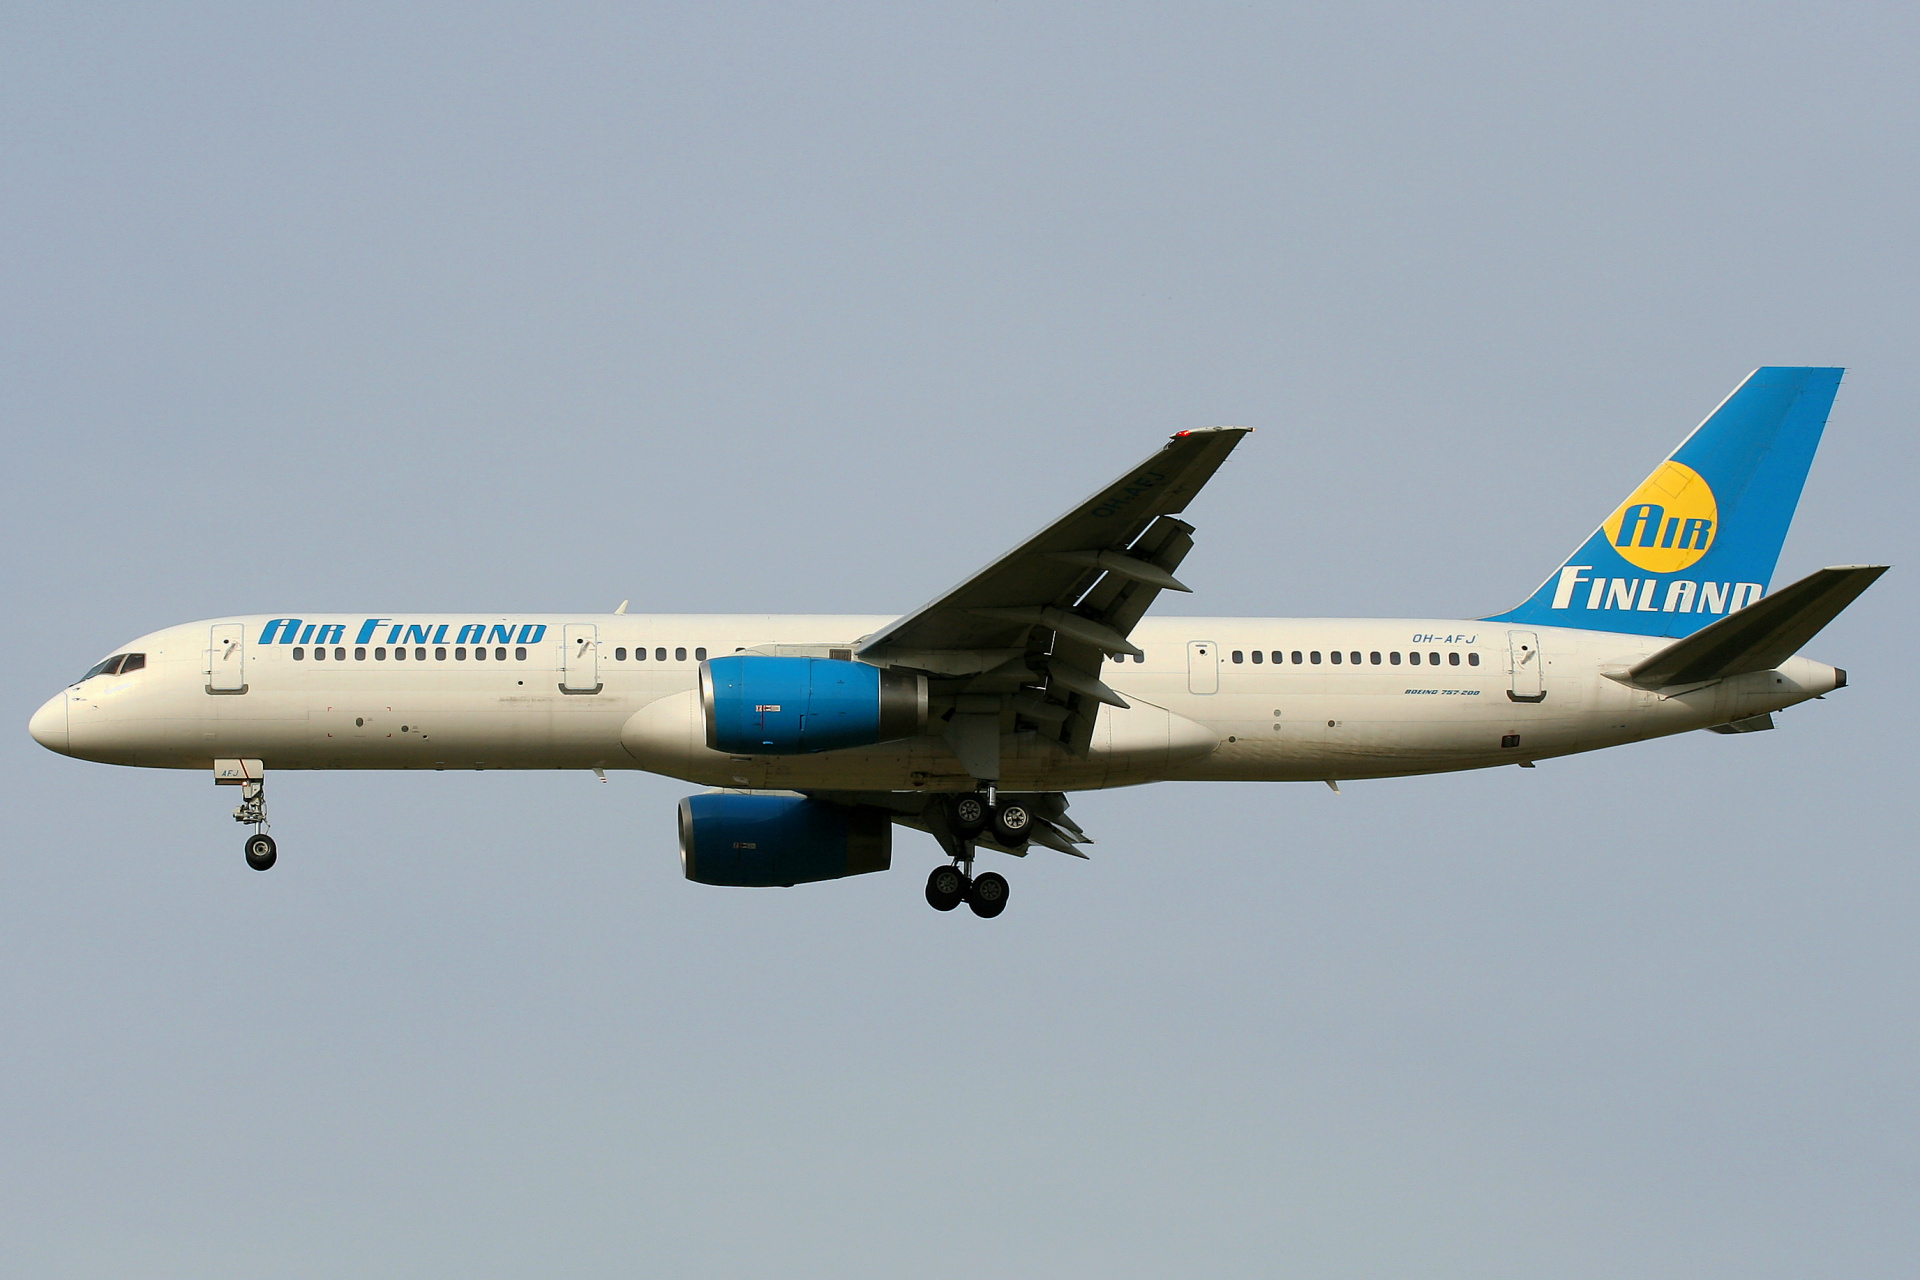 OH-AFJ, Air Finland (Aircraft » EPWA Spotting » Boeing 757-200)